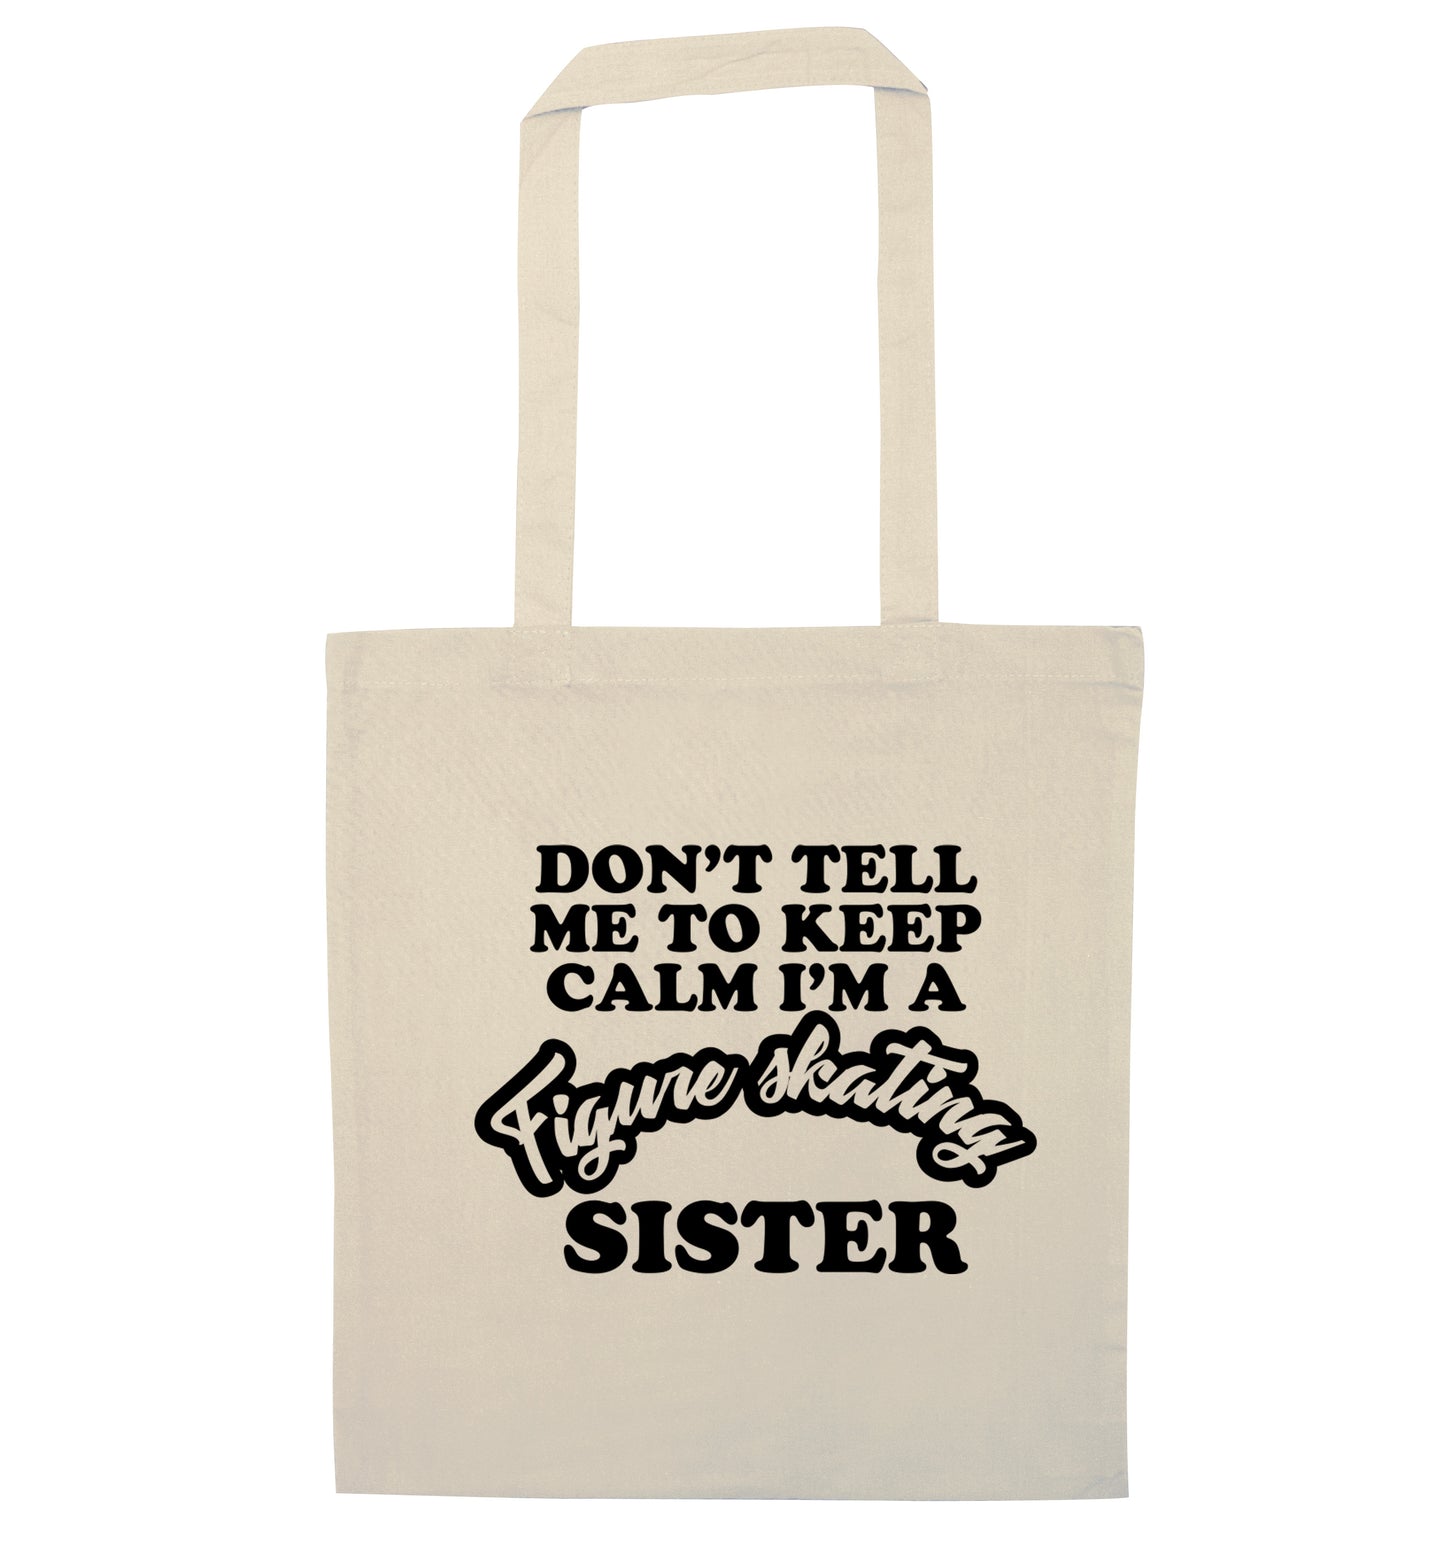 Don't tell me to keep calm I'm a figure skating sister natural tote bag